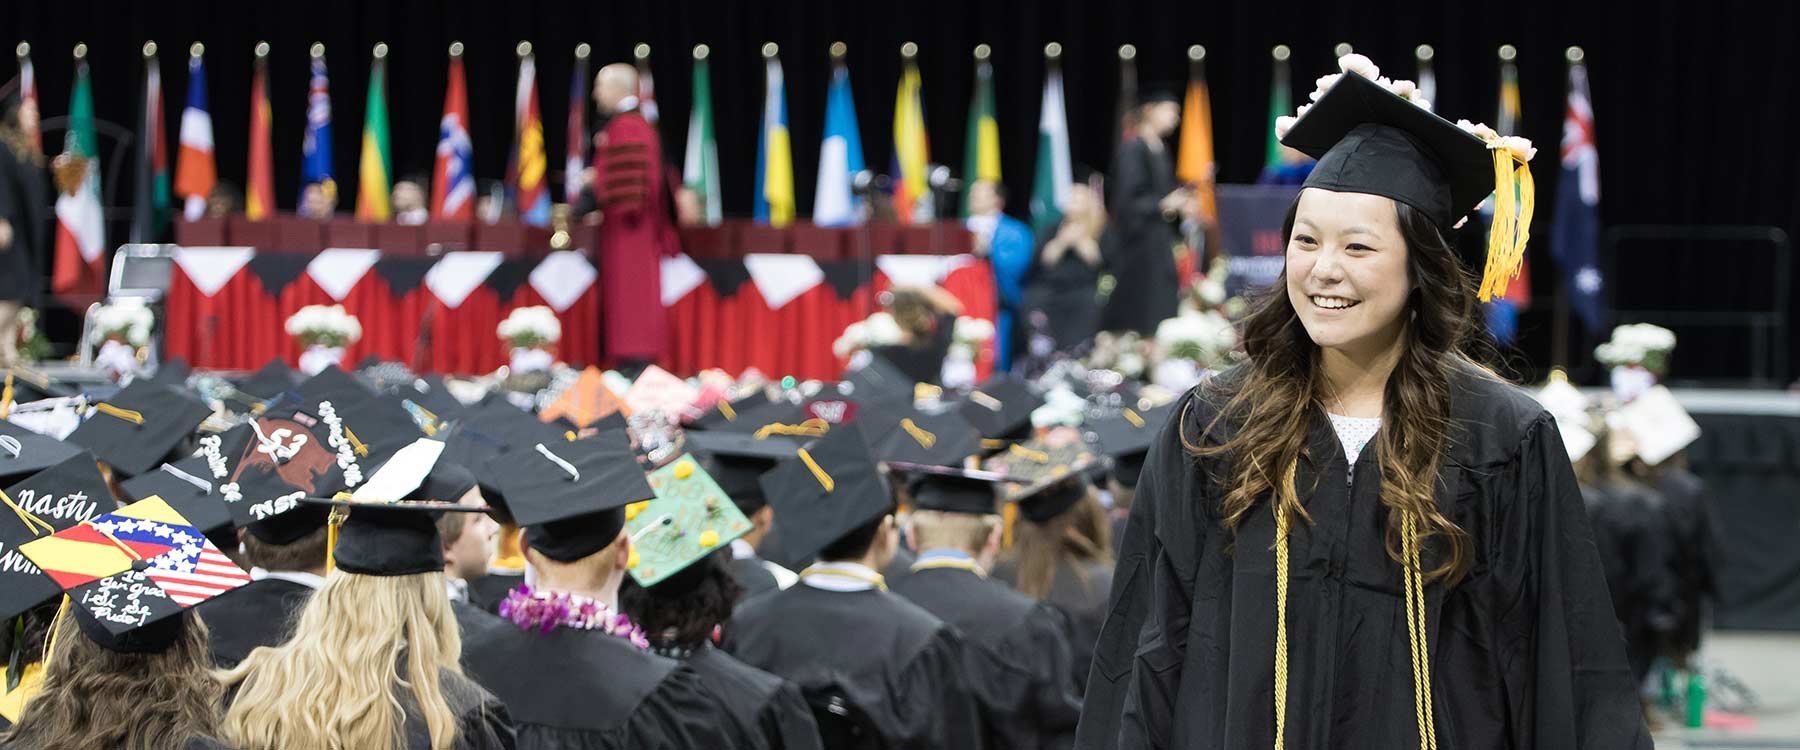 A student in a cap and gown walks past rows of other graduates during commencement.